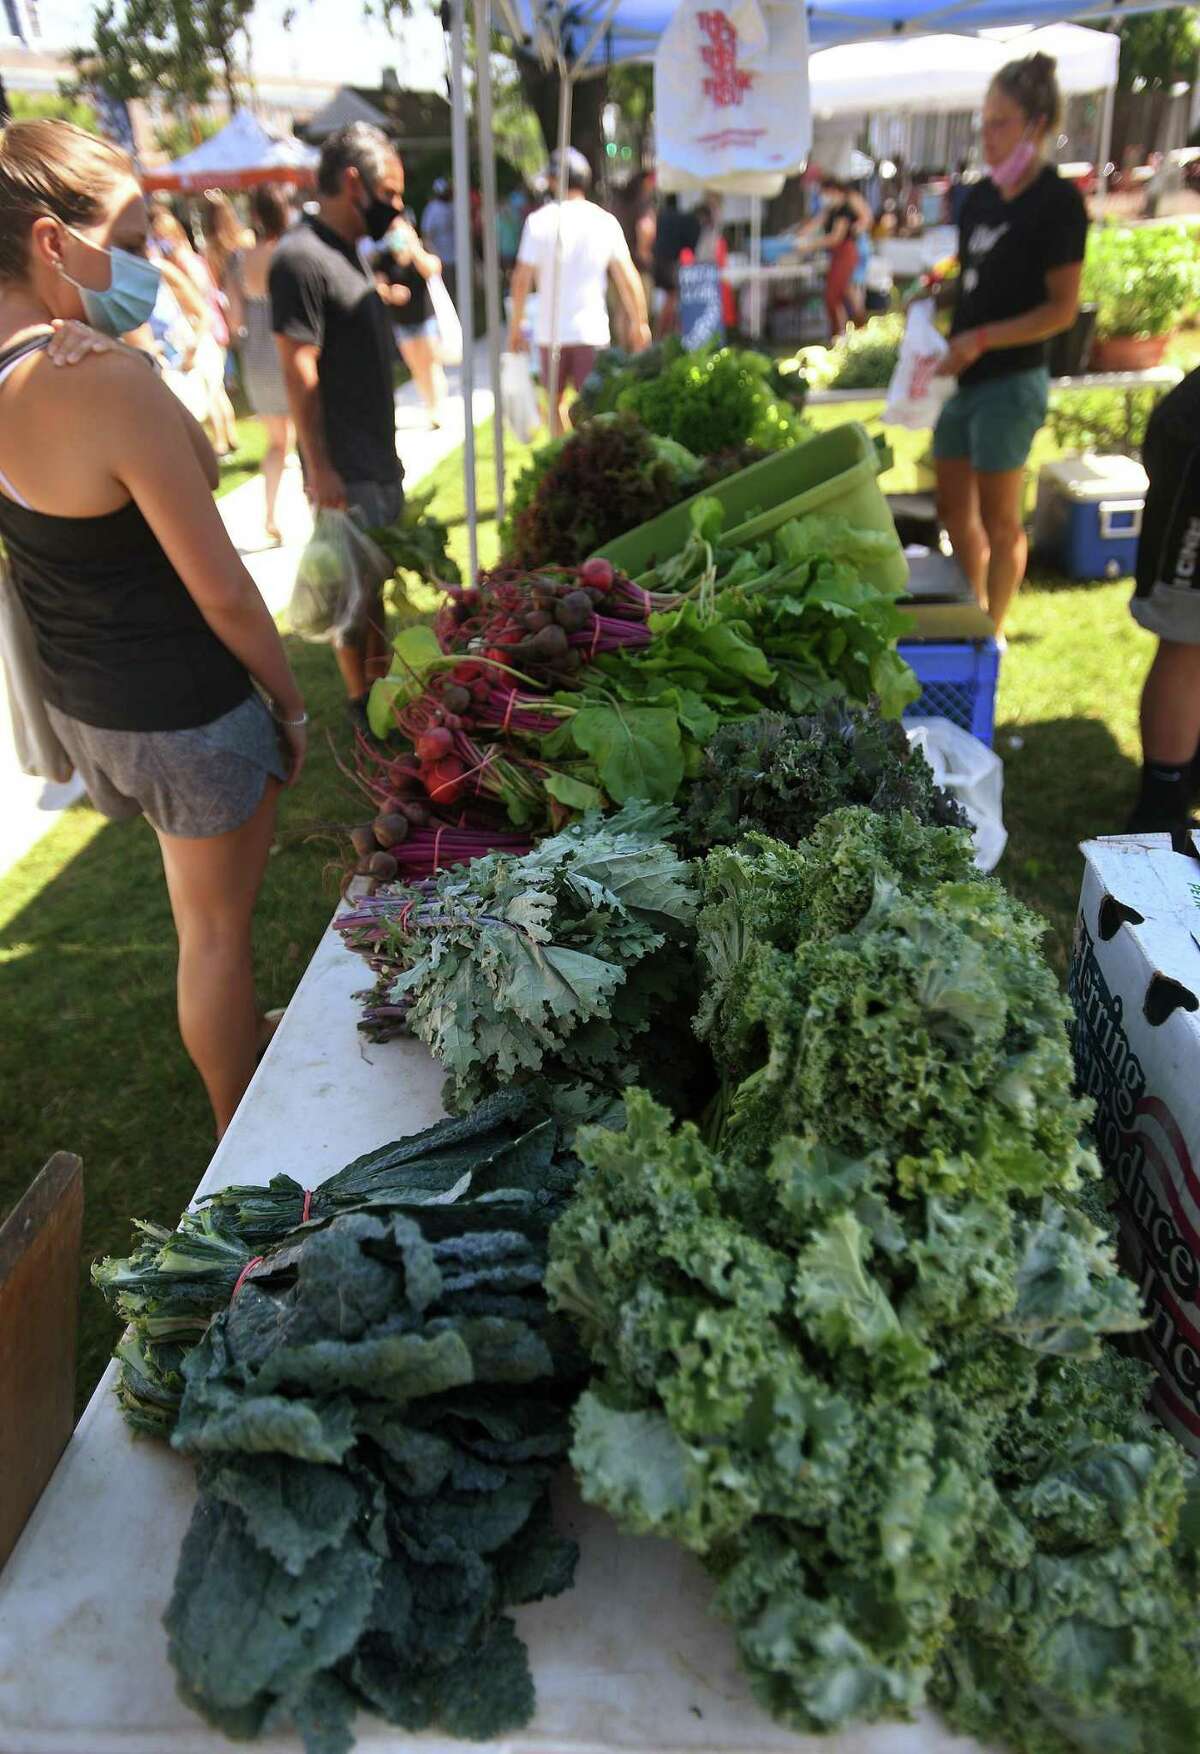 Fresh produce is spread out for purchase in Nature View Farm's booth during the opening day of the Fairfield Farmers Market on Sherman Green in Fairfield, Conn. on Sunday, June 28, 2020.